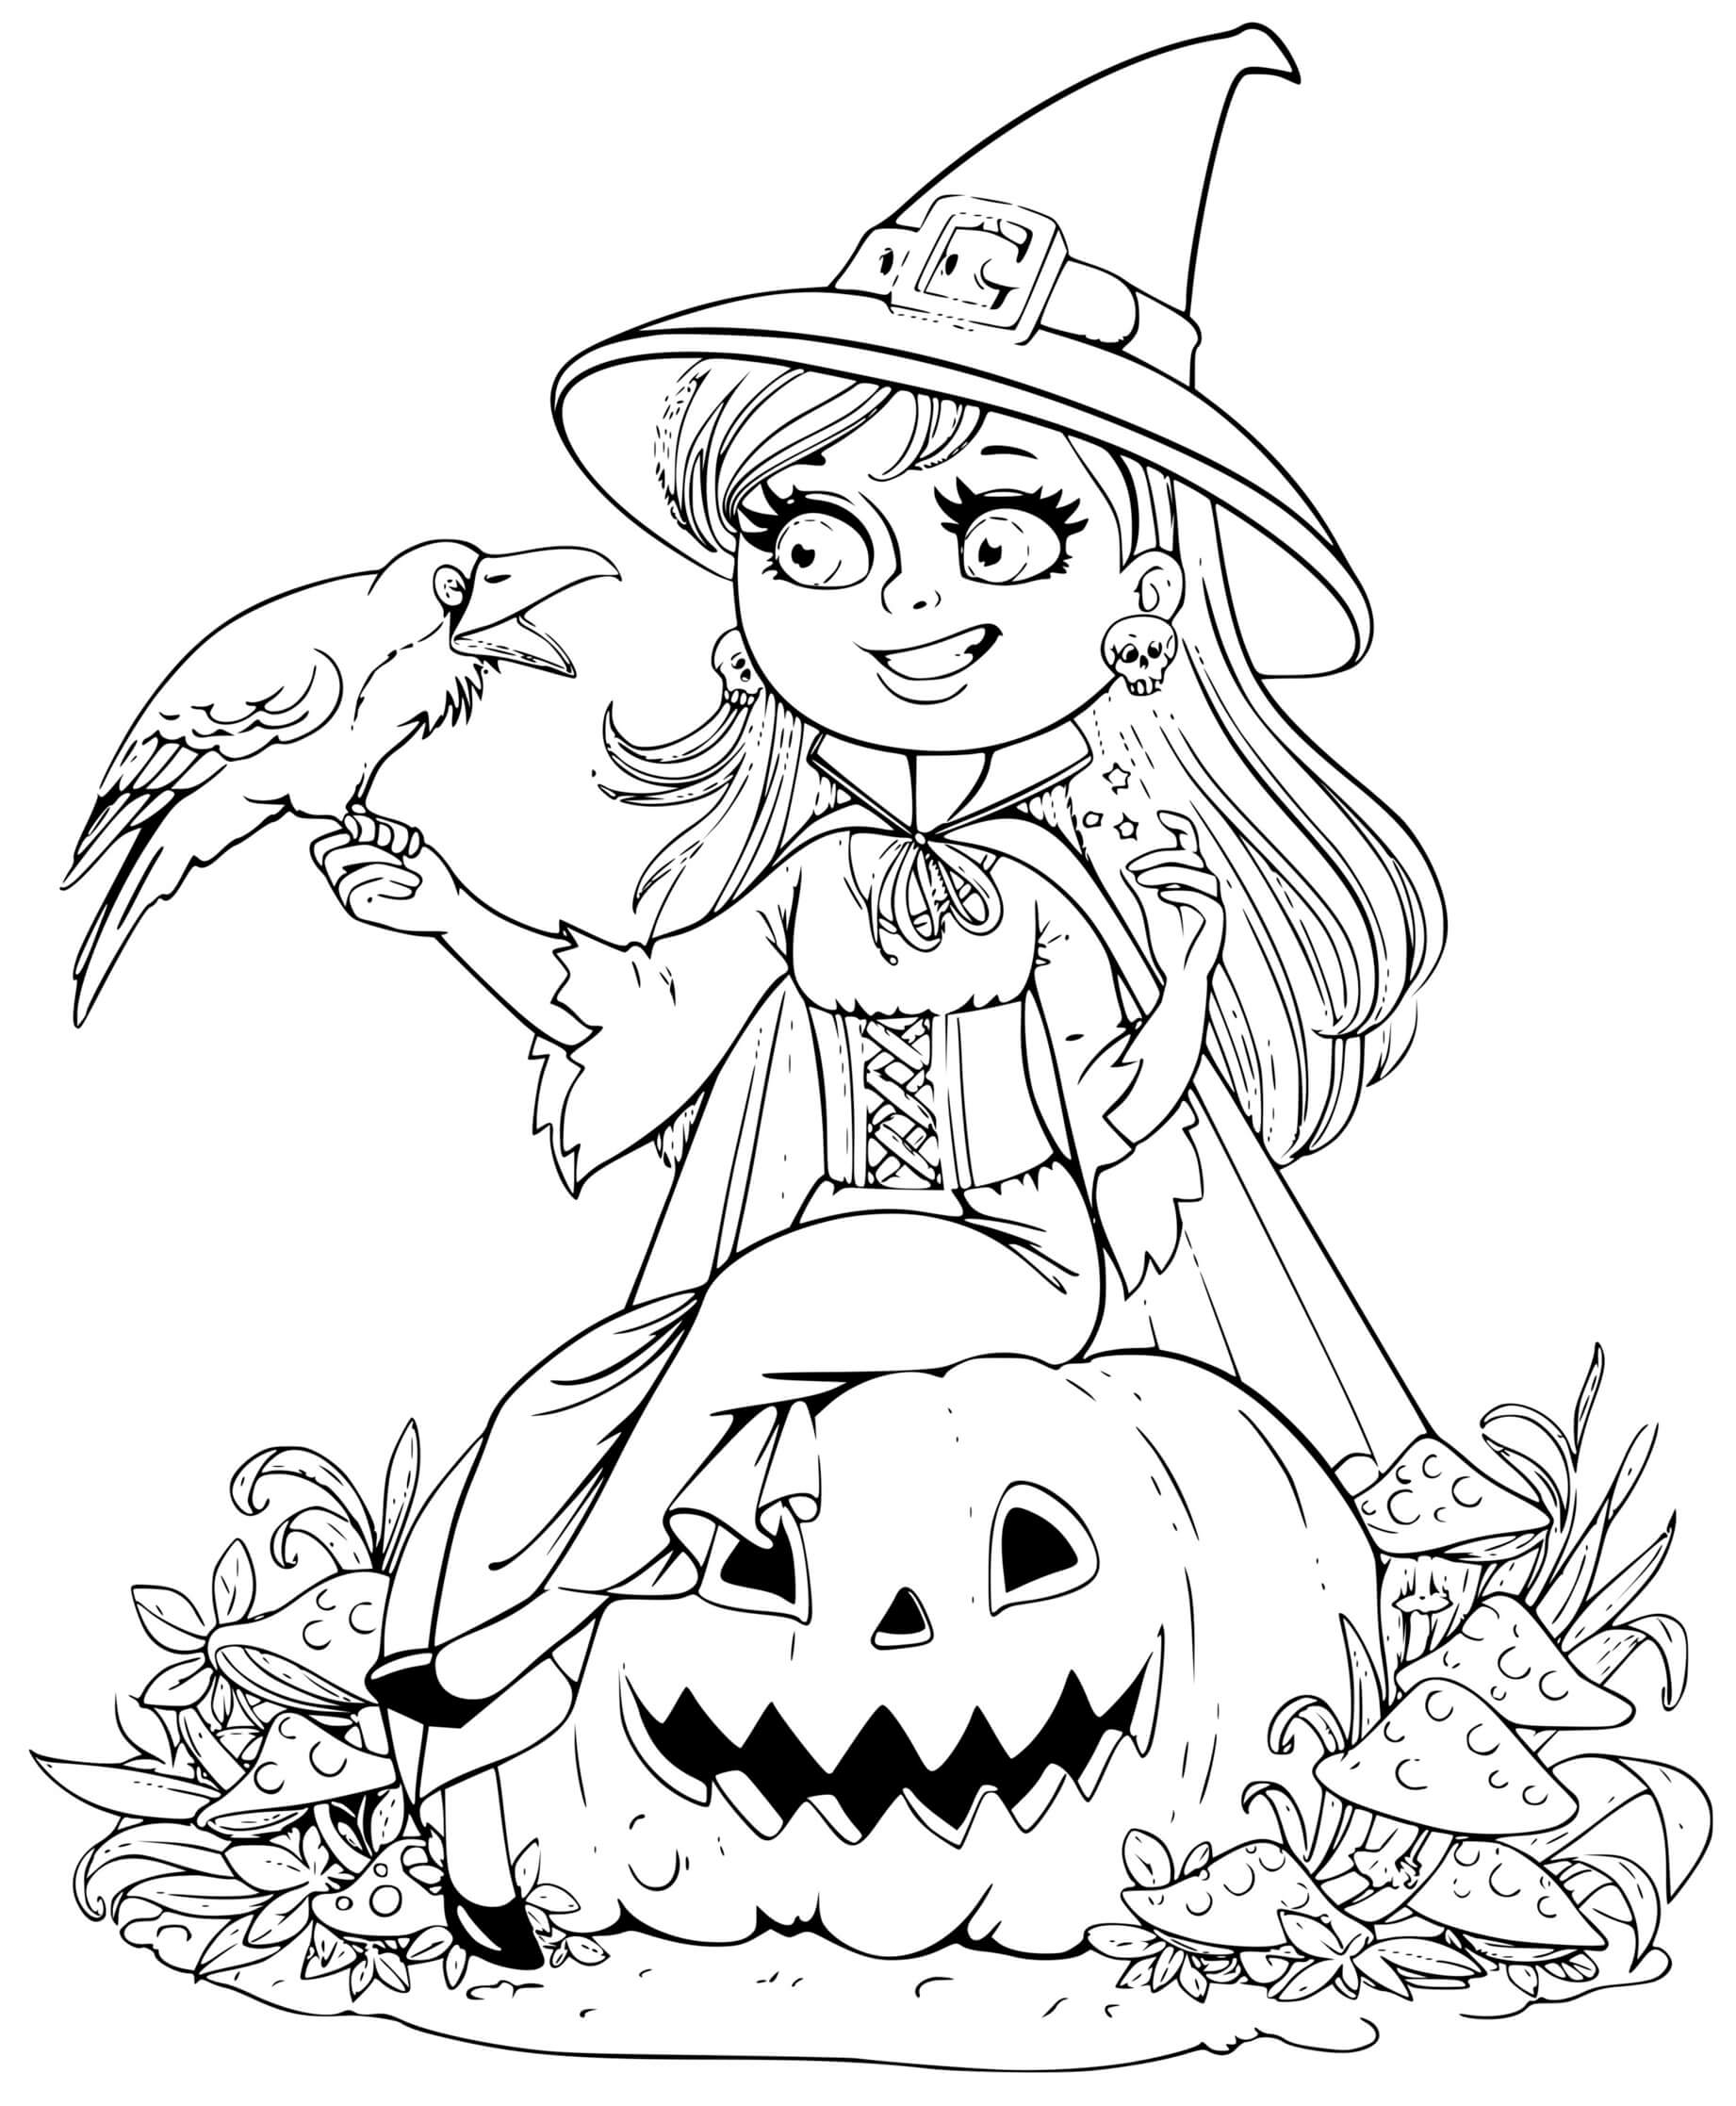 Halloween Smiling Witch And Crow By Azuzl